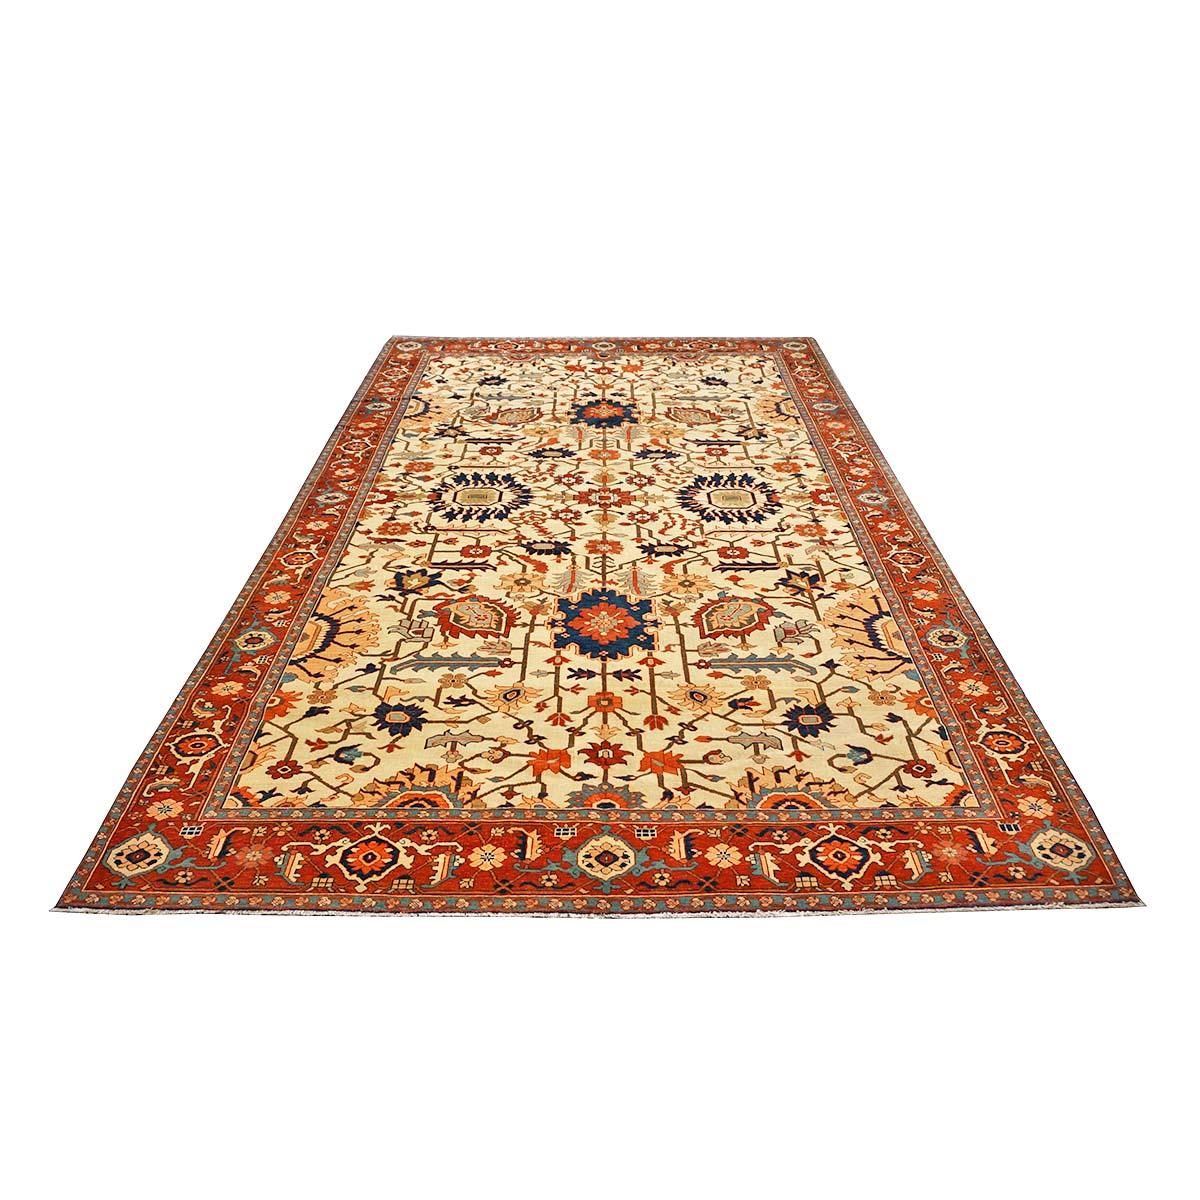  Ashly Fine Rugs presents a new antique reproduction Persian Serapi 7x11 handmade area rug. Persian Serapi rugs are amongst the most desired rugs by connoisseurs, collectors, and interior designers. Made with all vegetable-dyed, handspun wool and